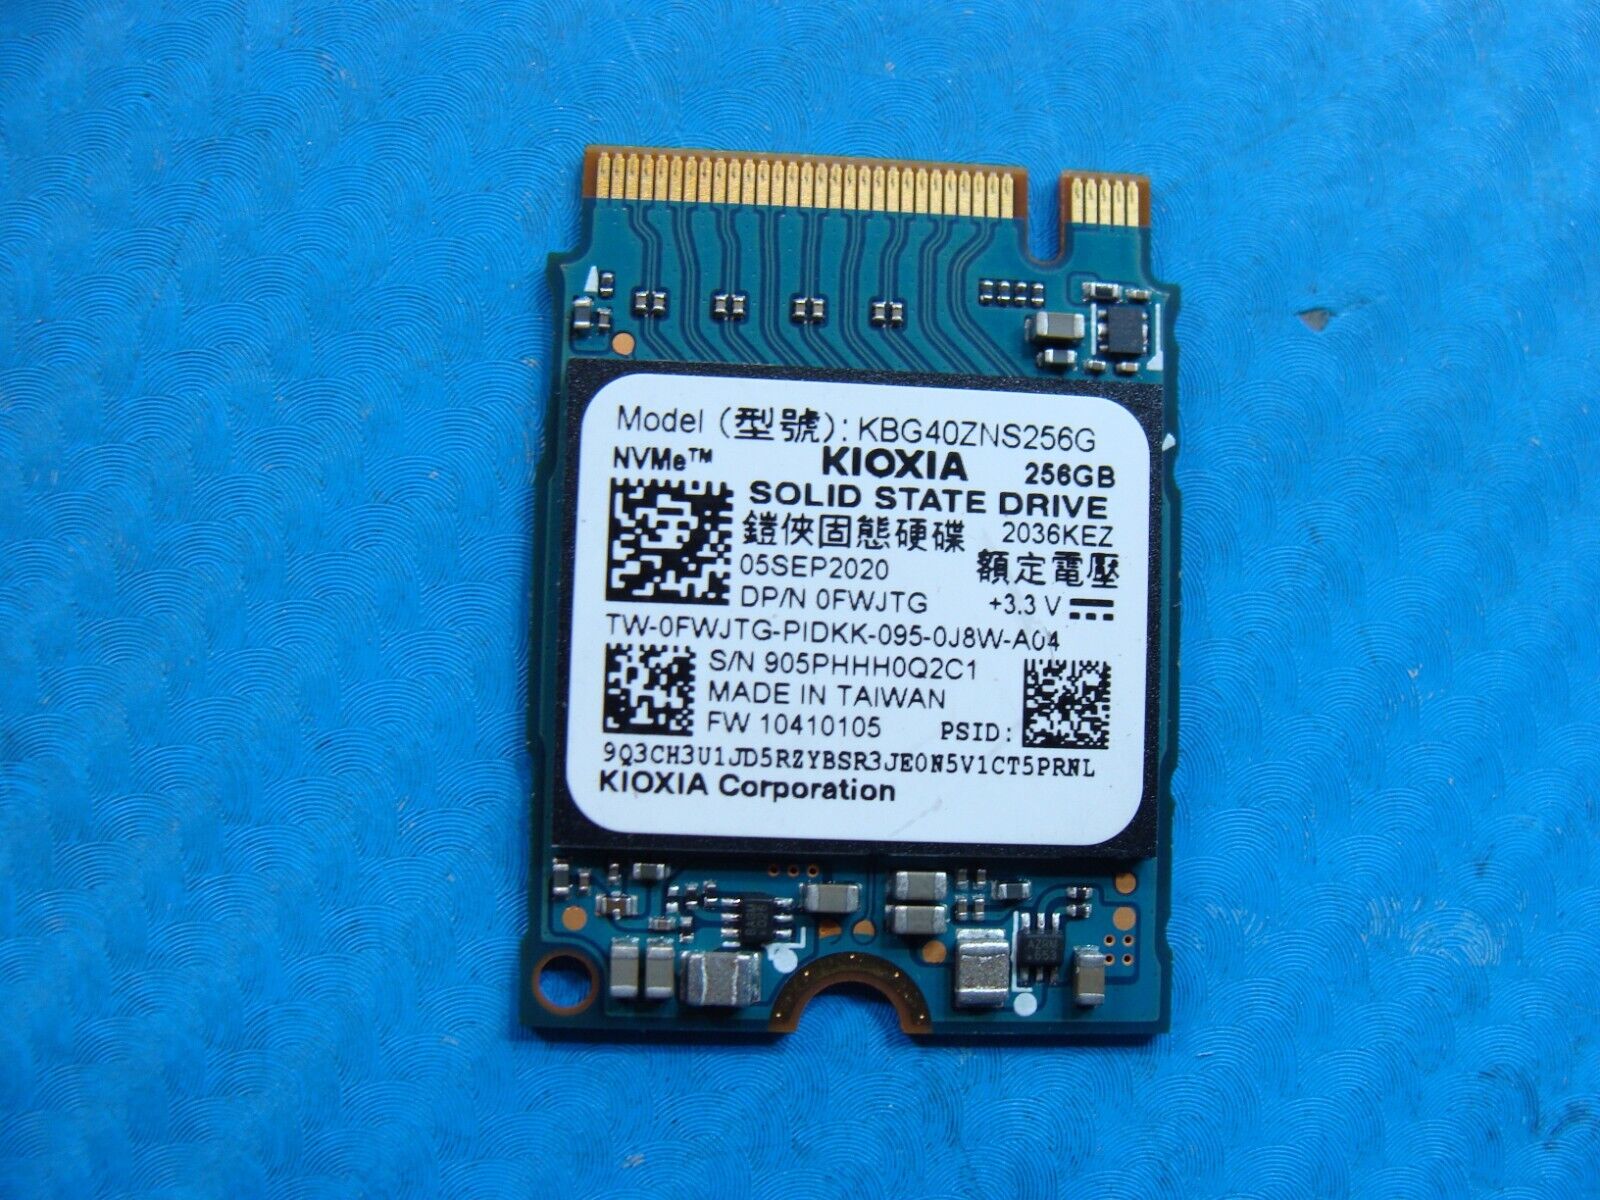 Dell 5510 Kioxia 256GB M.2 NVMe SSD Solid State Drive KBG40ZNS256G FWJTG